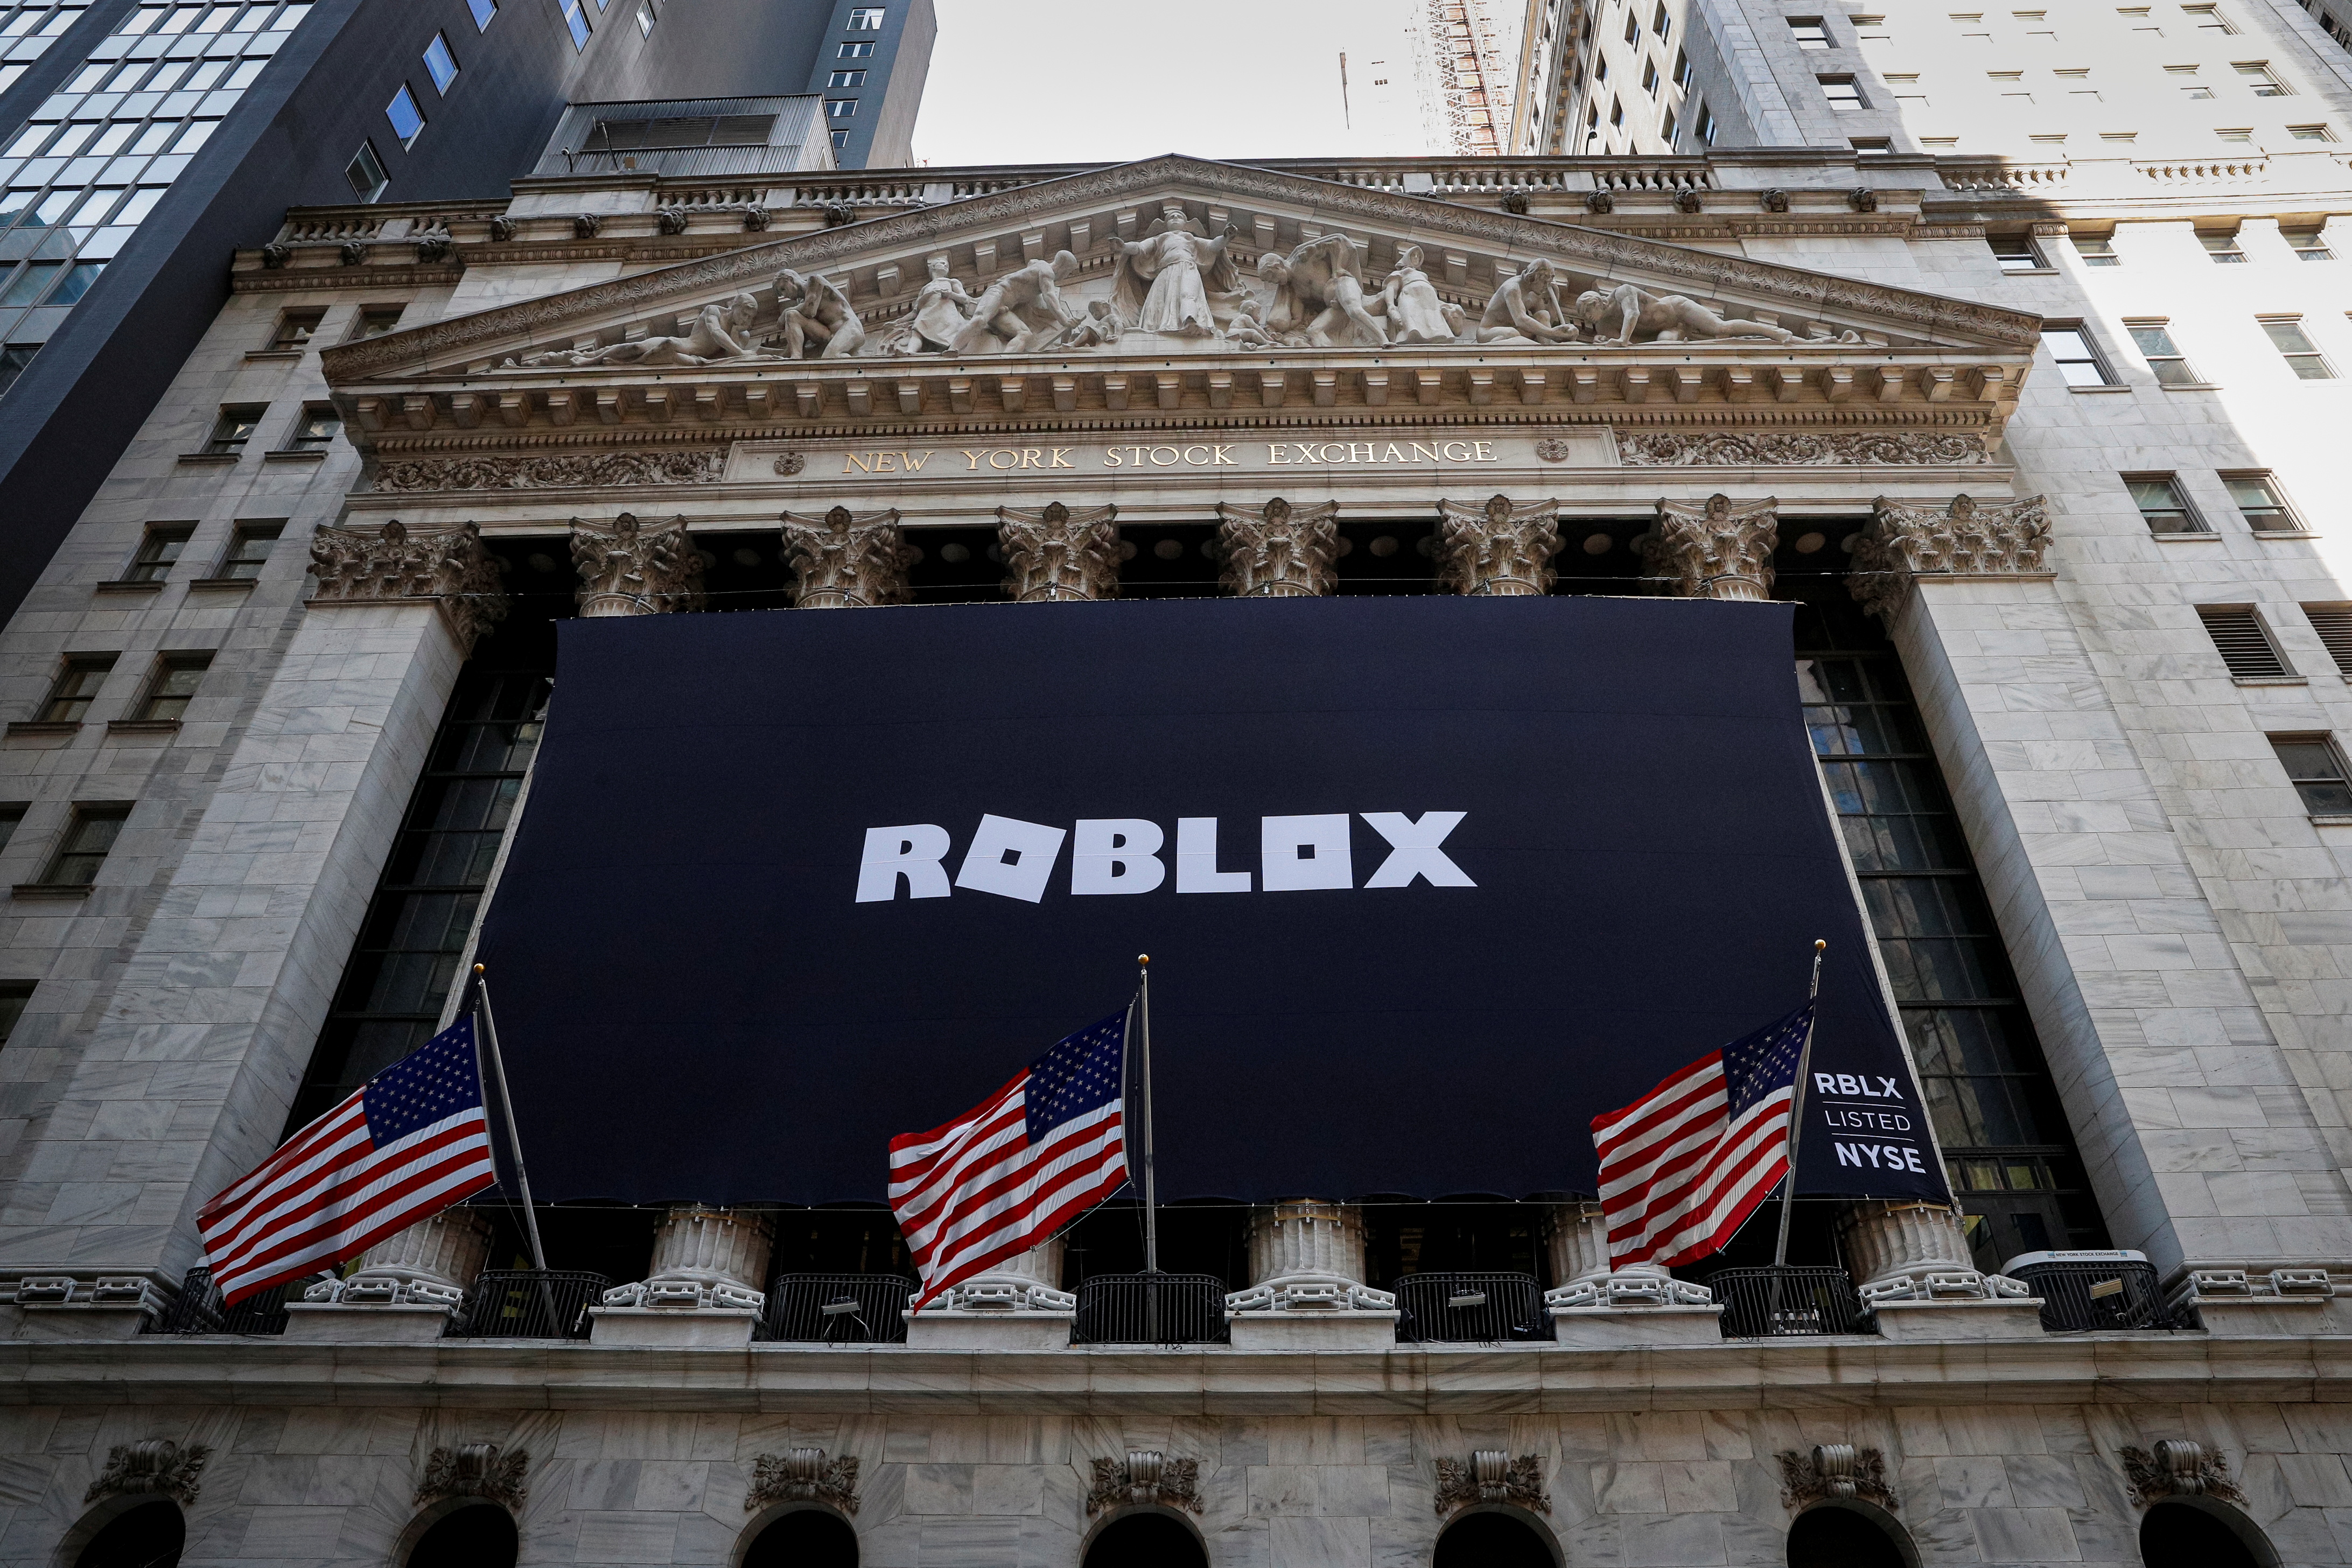 The Roblox logo is displayed on a banner, to celebrate the company's IPO at the NYSE is seen in New York